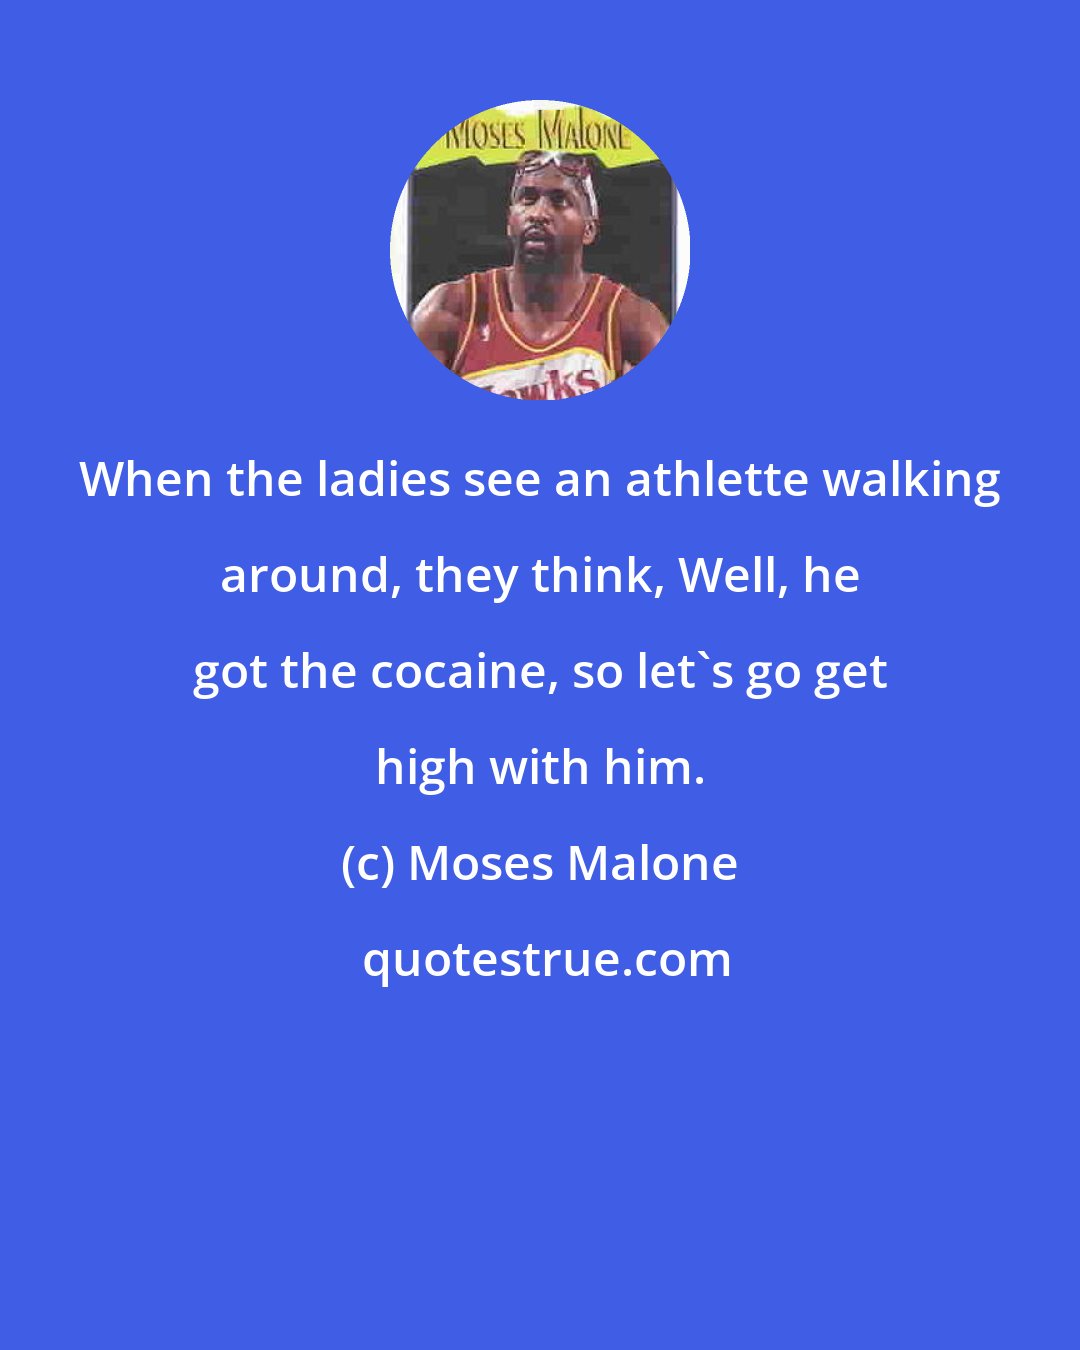 Moses Malone: When the ladies see an athlette walking around, they think, Well, he got the cocaine, so let's go get high with him.